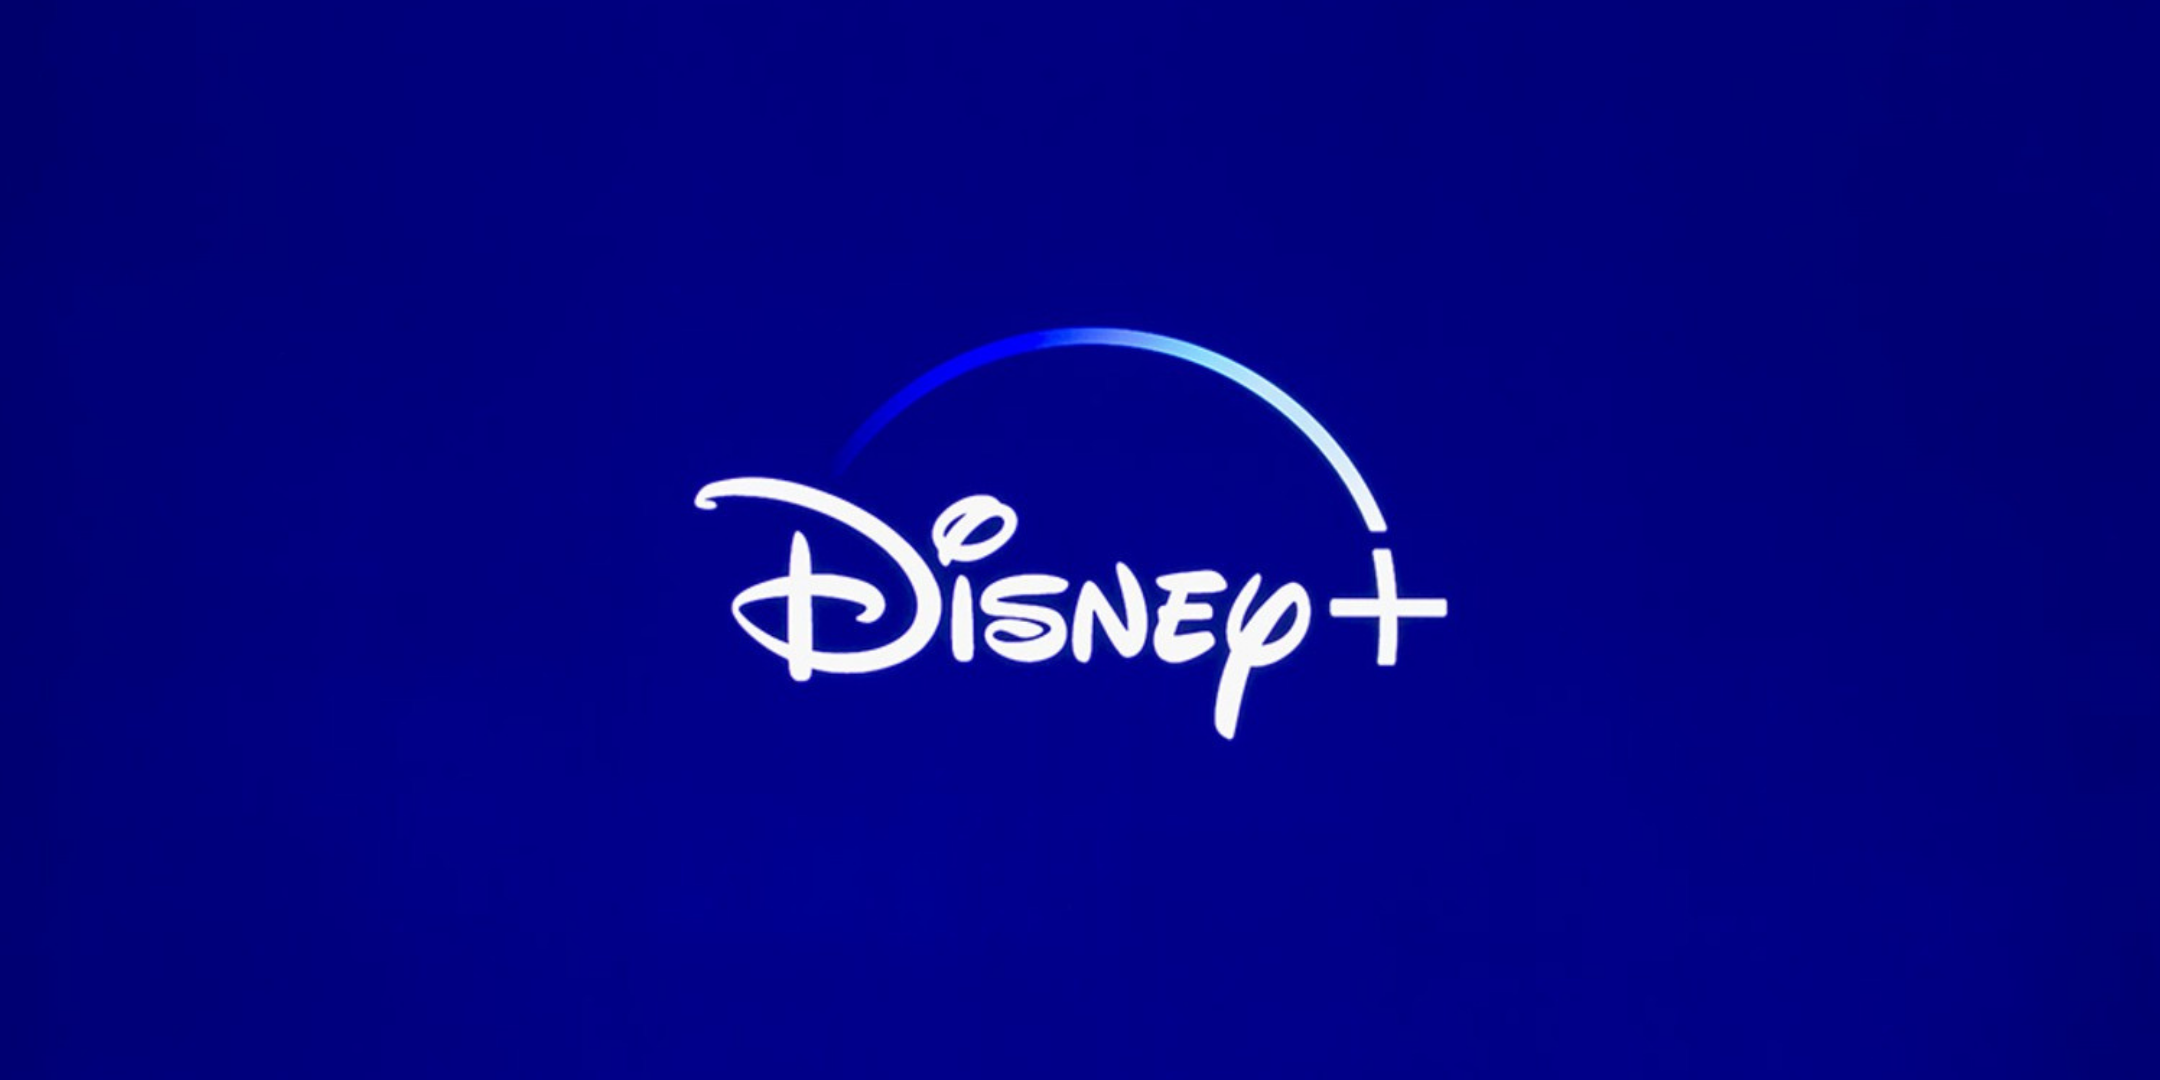 Access Alert. Disney+ enters the South African market